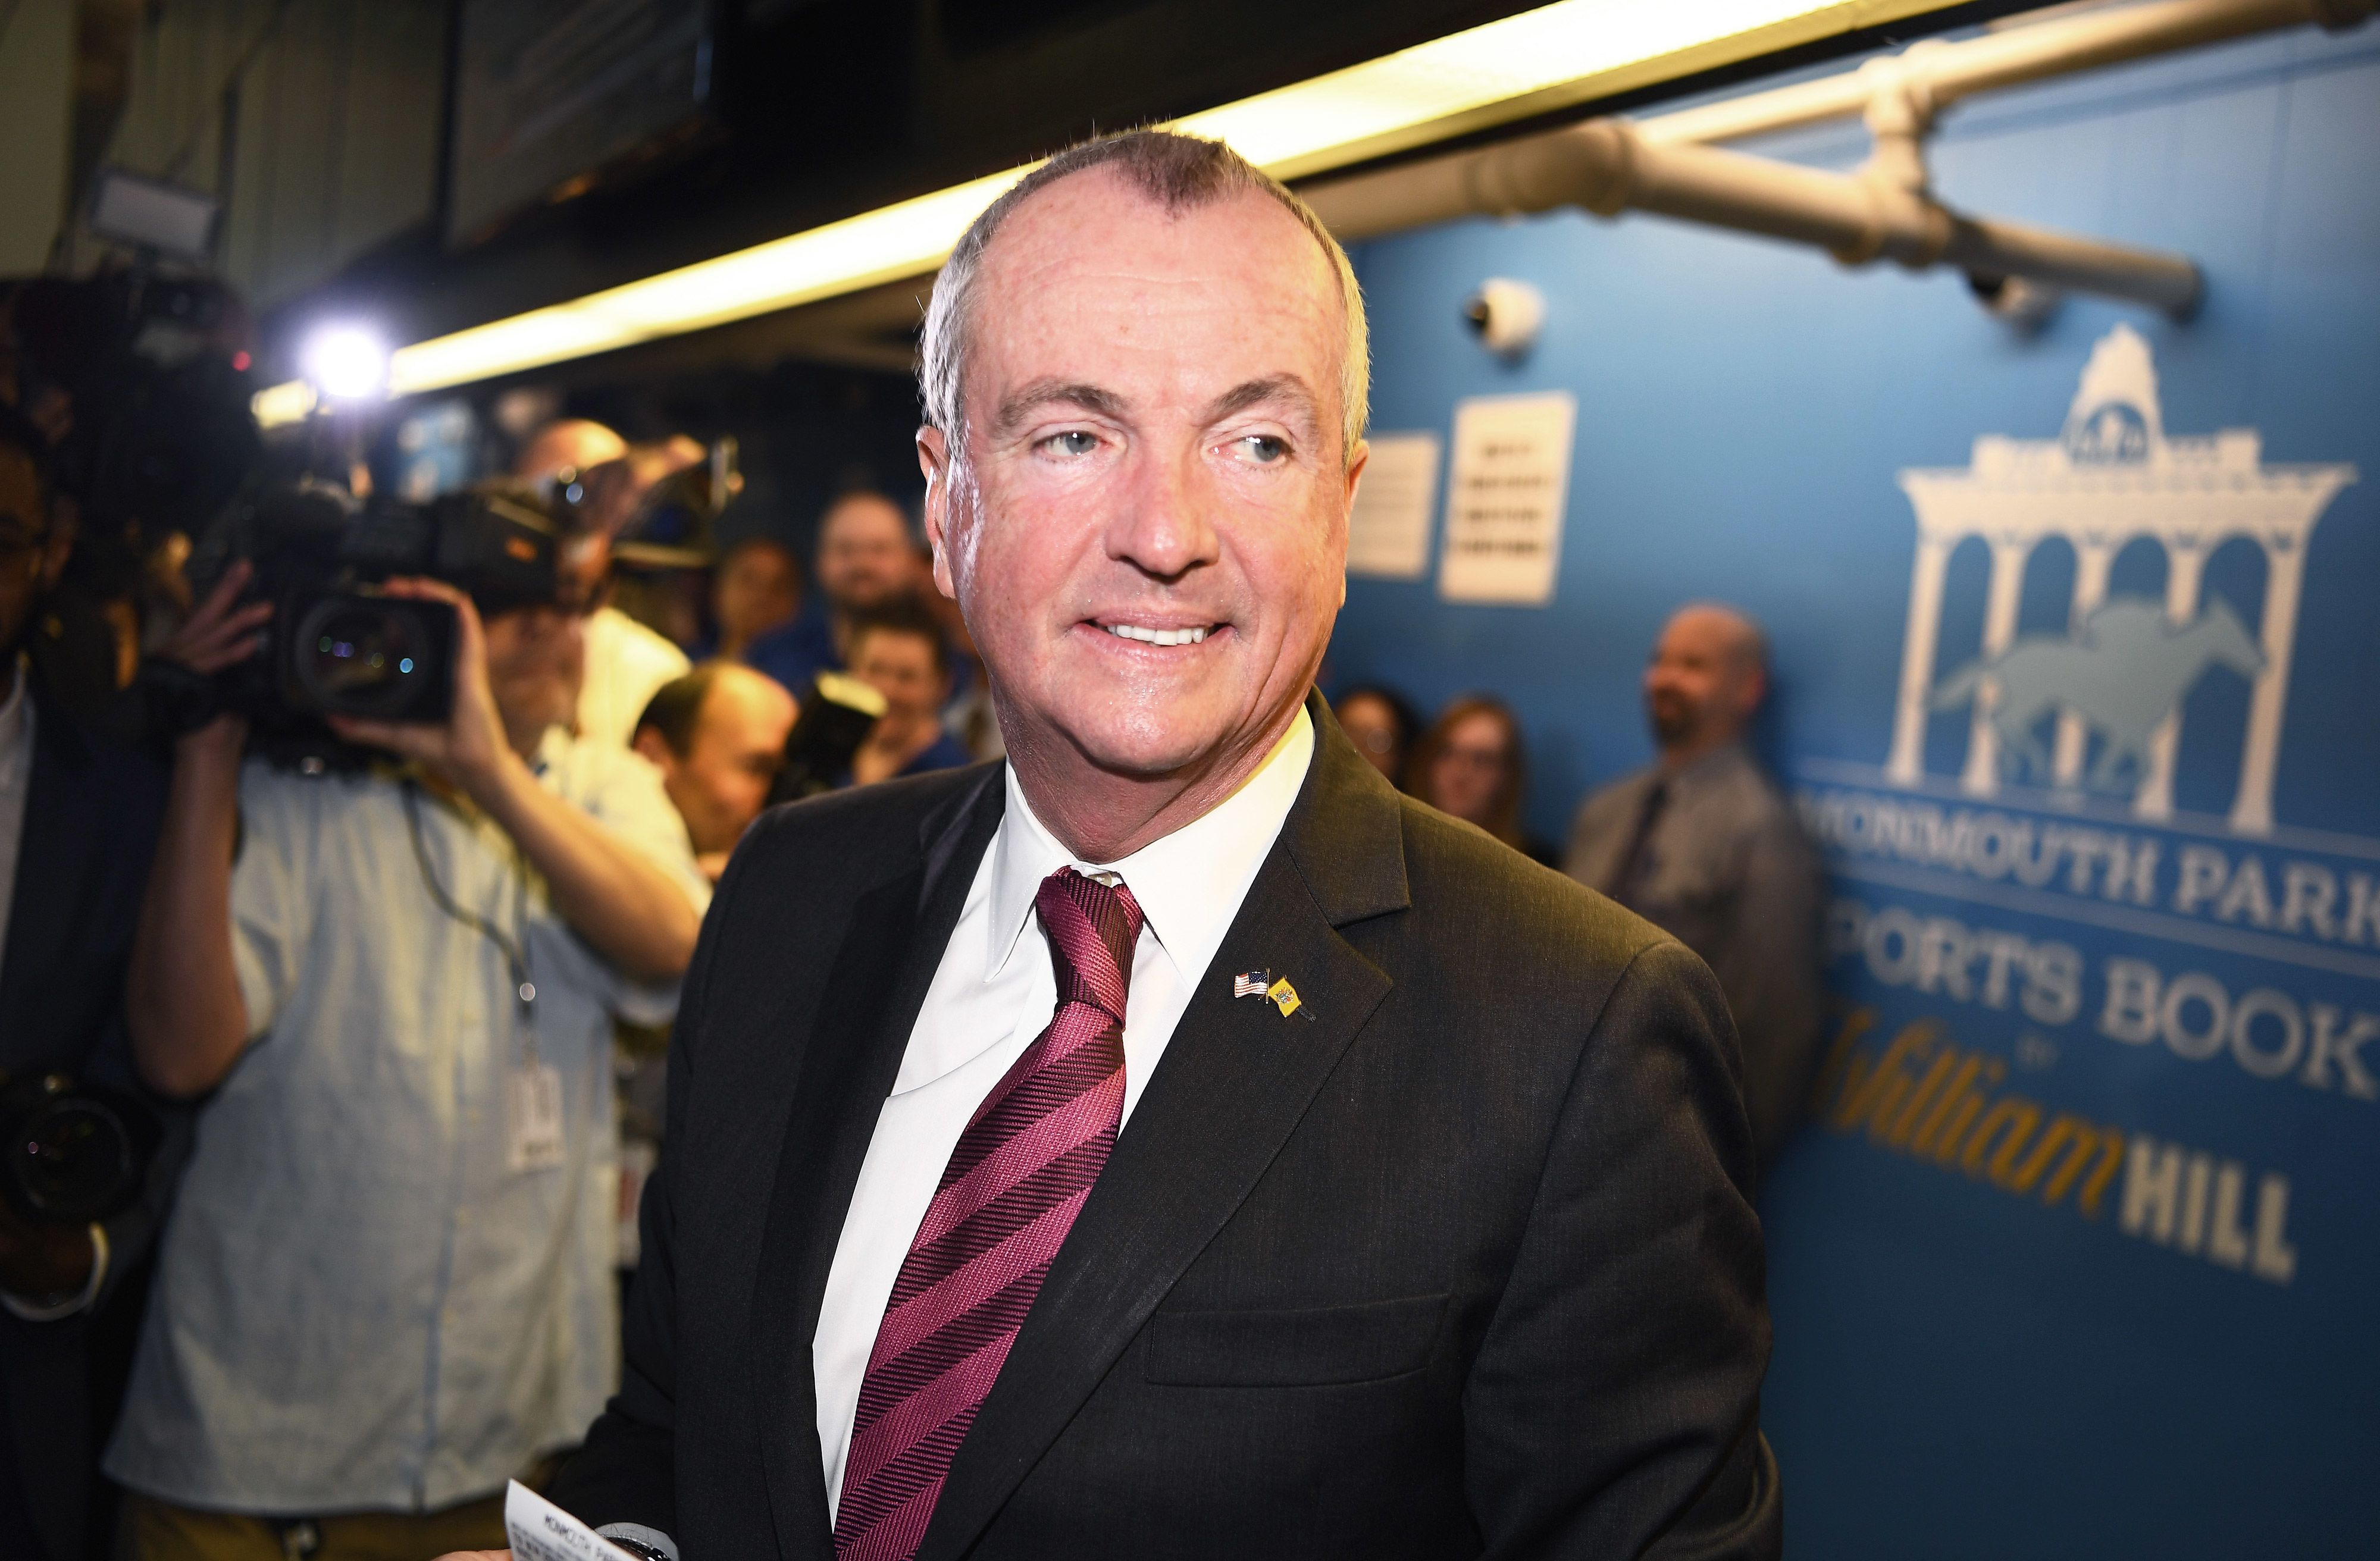 Governor Phil Murphy on X: New Jersey state law defines Central